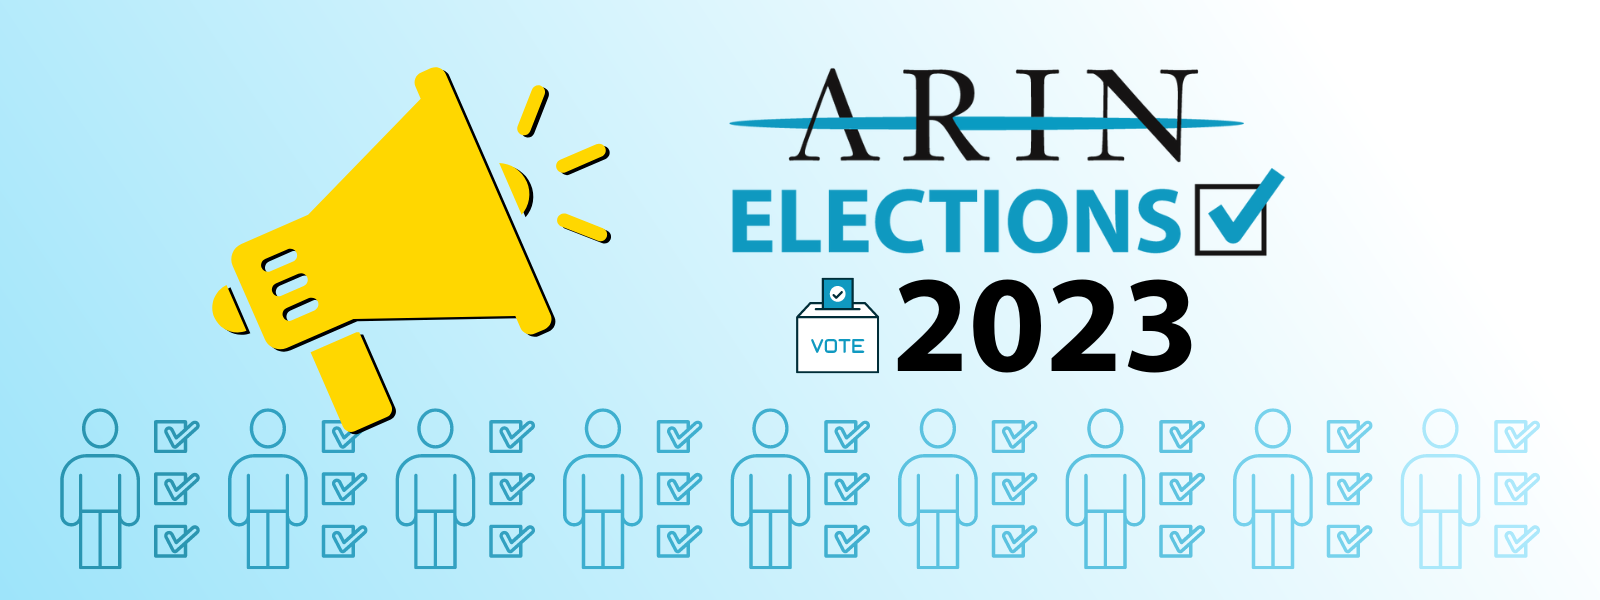 ARIN Elections 2023